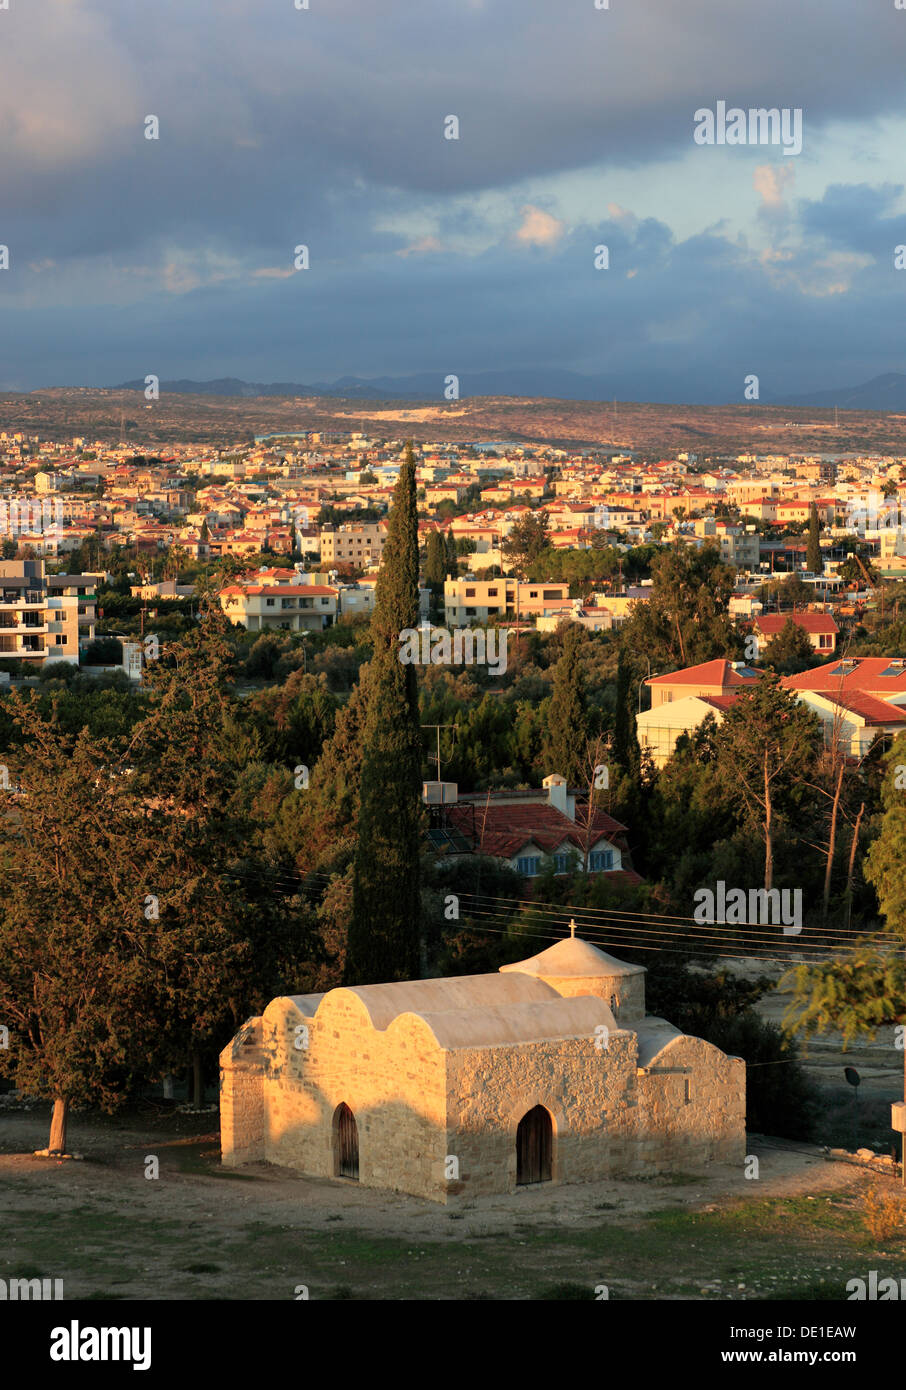 Cyprus, Agios Efstathios in Kolossi Church and overlooking the town of Limassol, Lemesos, Limassol, Stock Photo